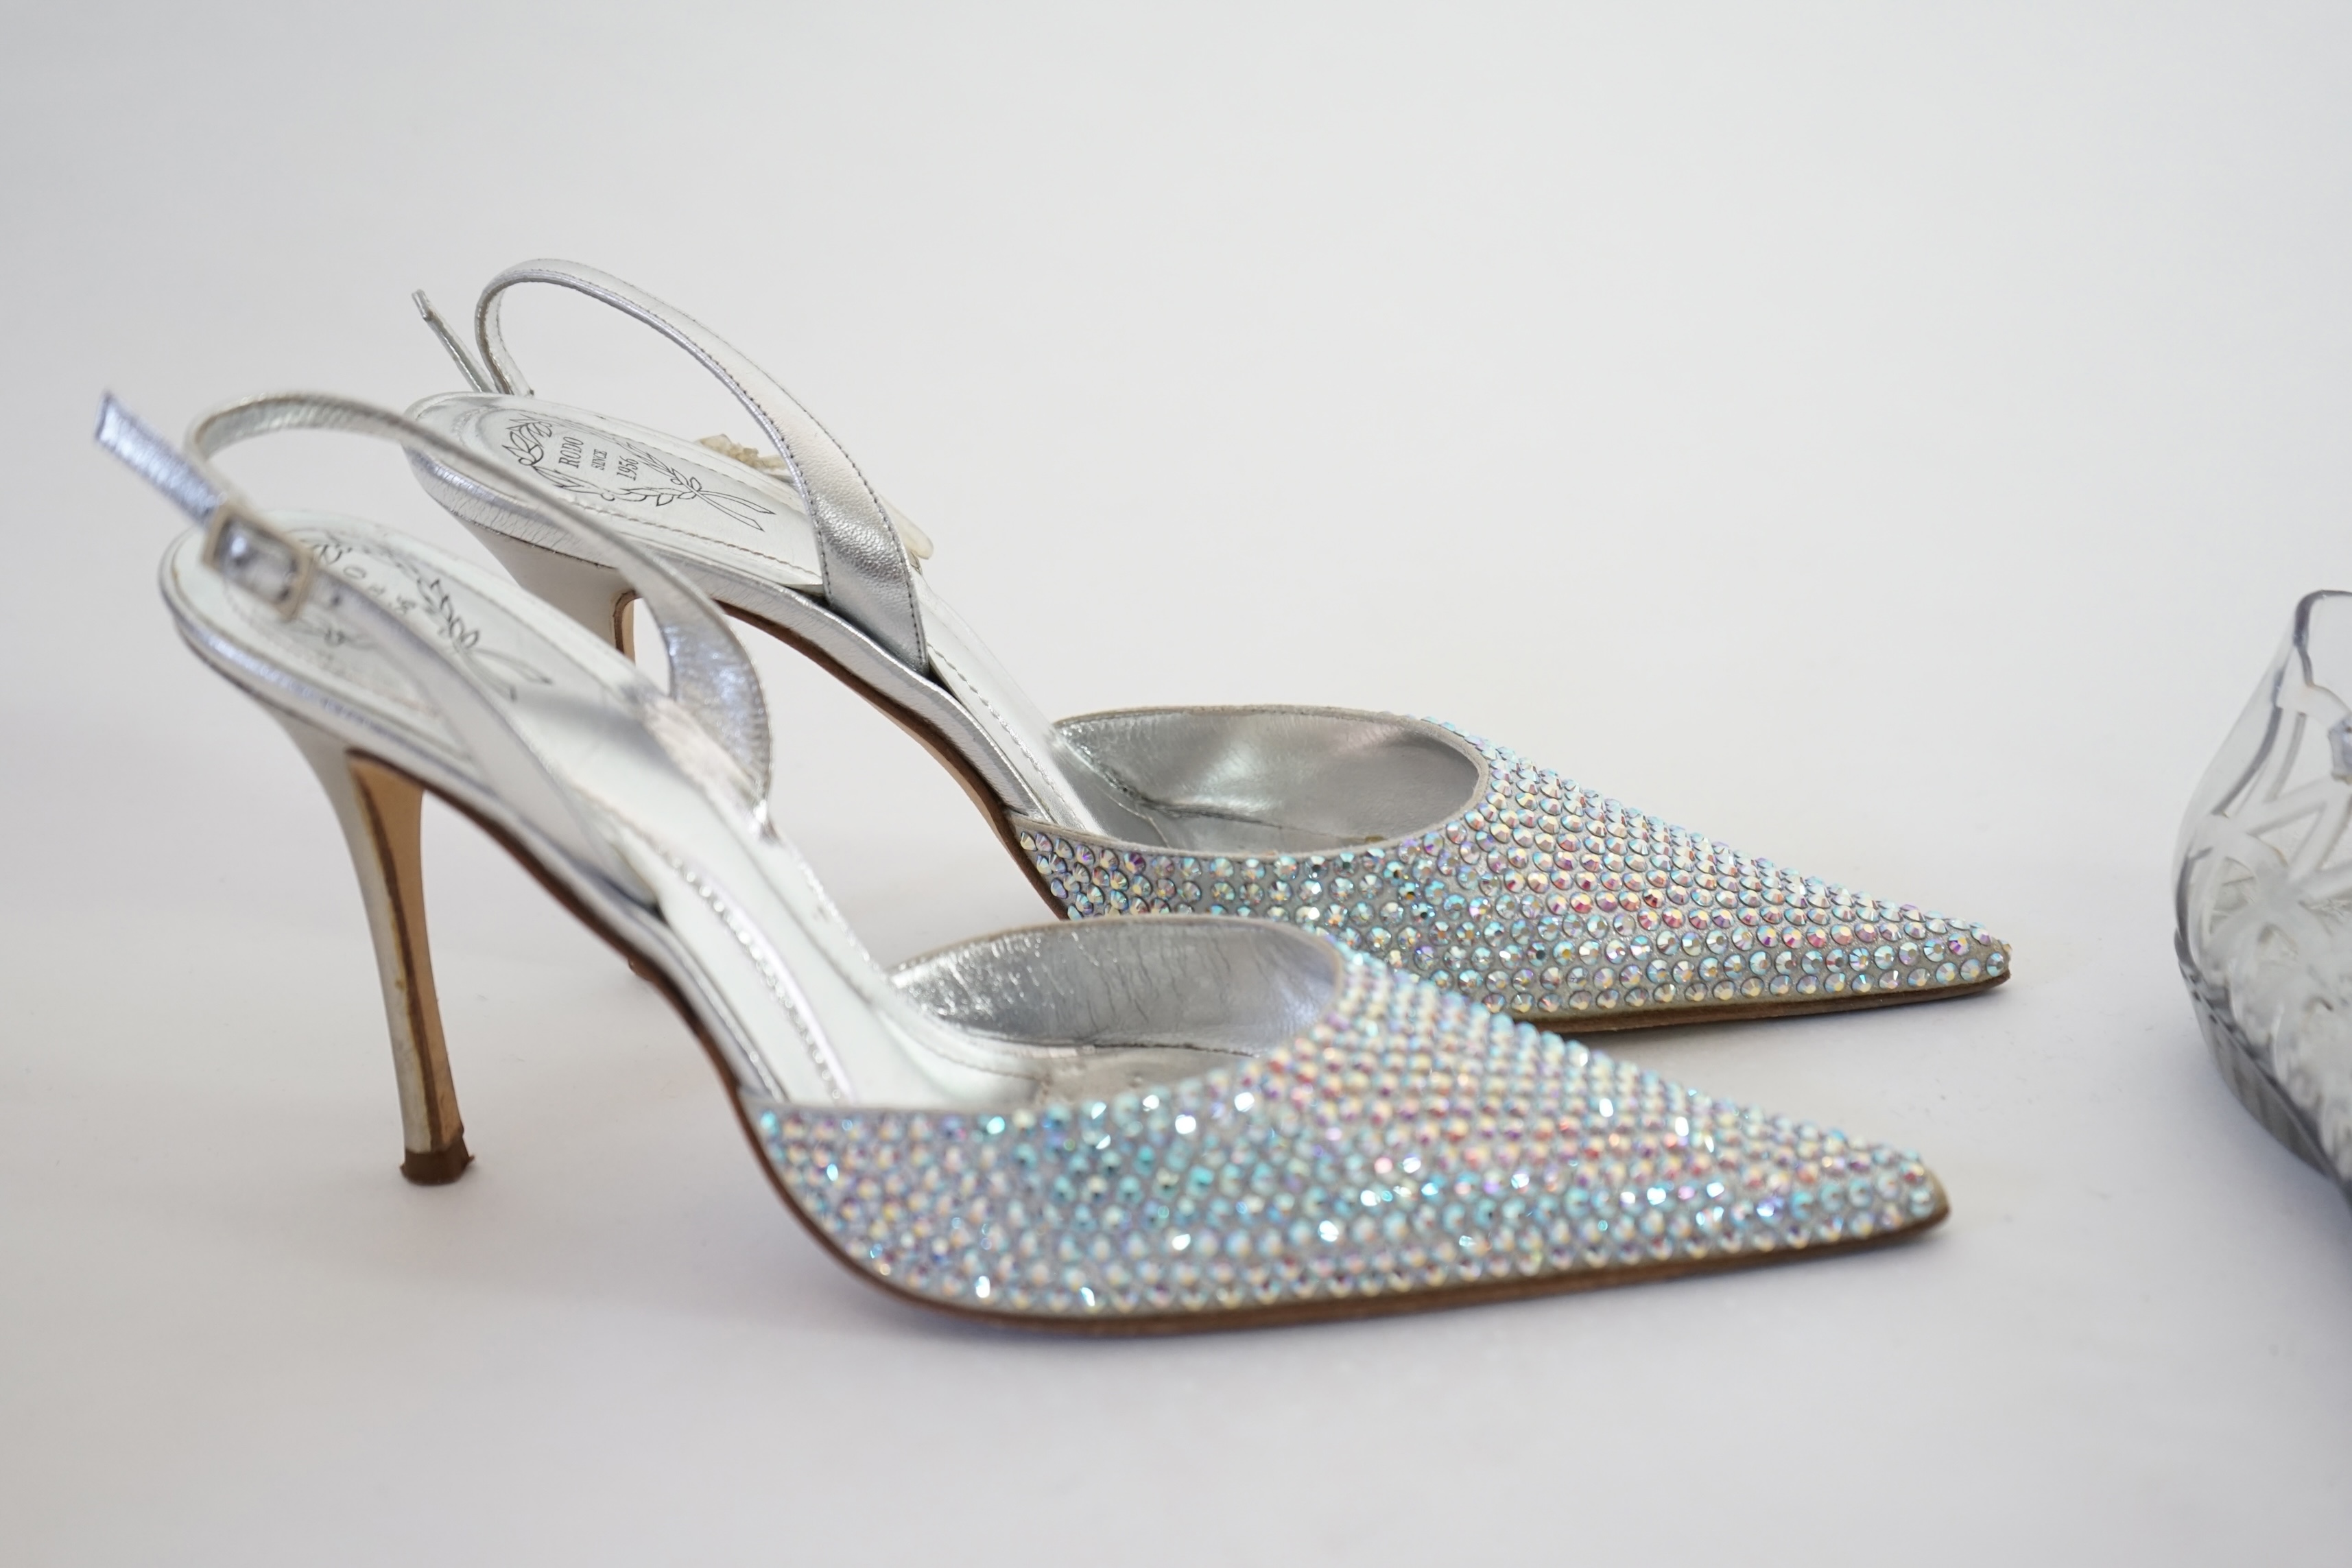 Three pairs of lady's silver shoes: Rodo silver diamonté sling back heels, Moda in Pelle silver snakeskin pattern heeled pumps and a pair of Stuart Weitzman clear jelly's with crystals. Size 38.5 (UK 4). Proceeds to Happ